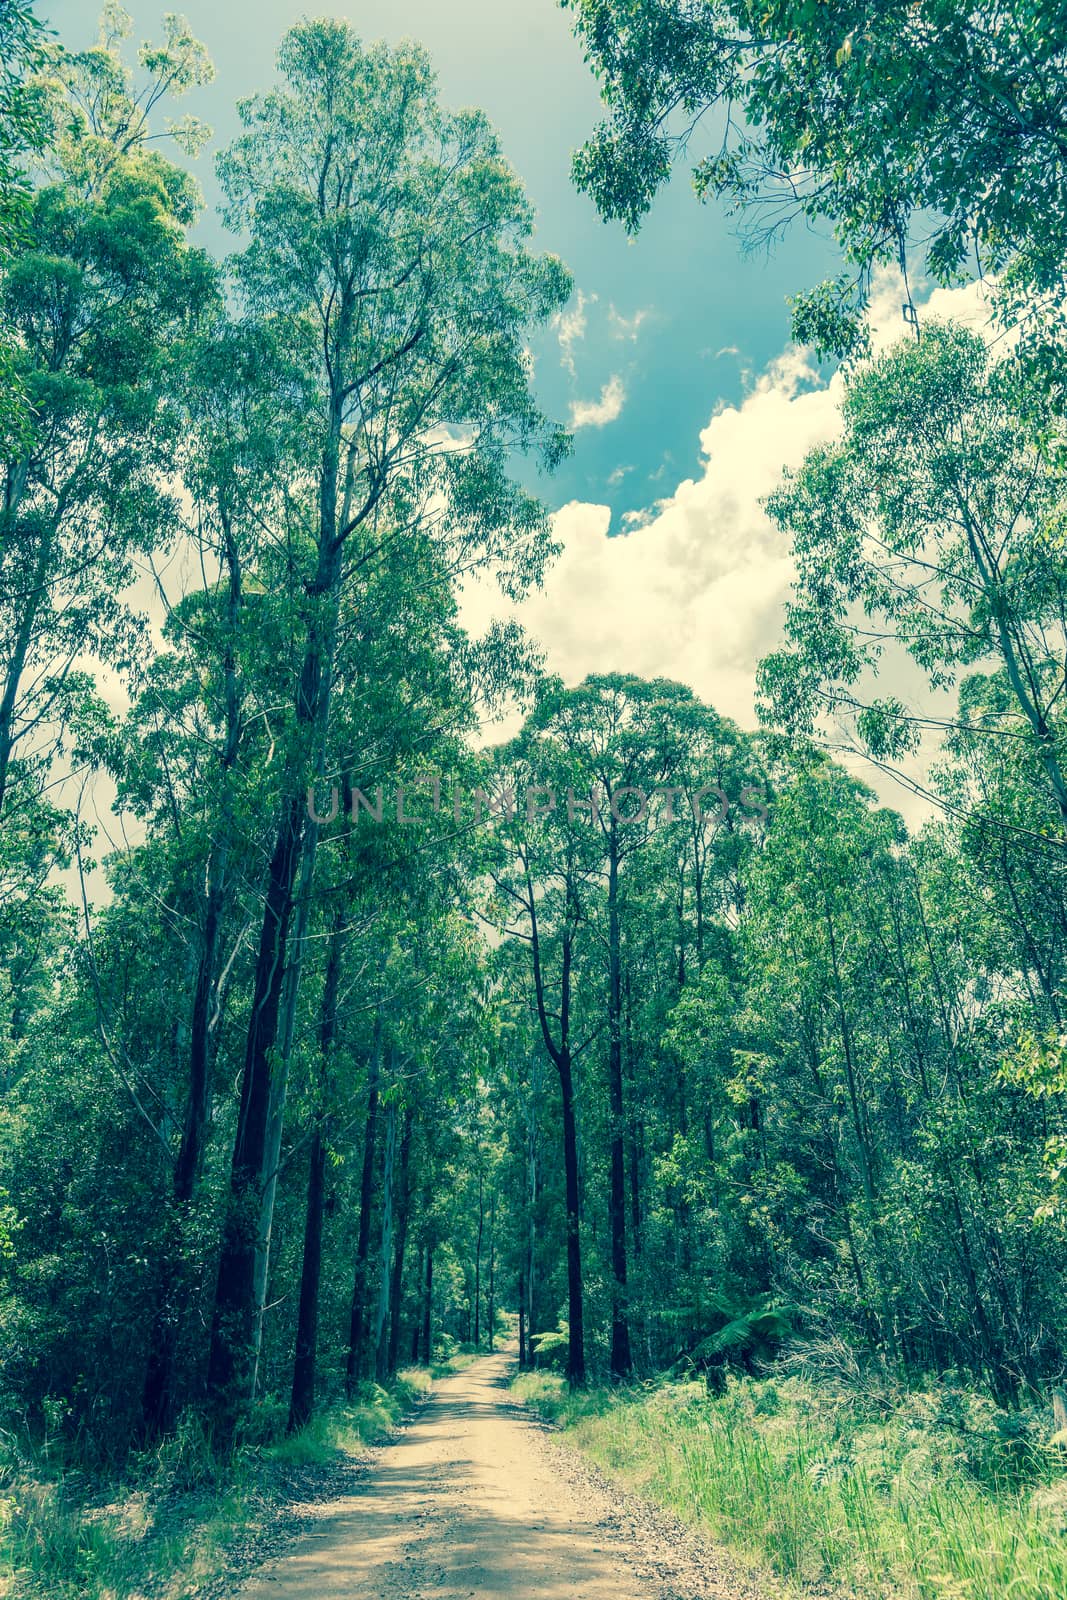 Dirt road leading through eucalyptus trees vintage style image. by brians101